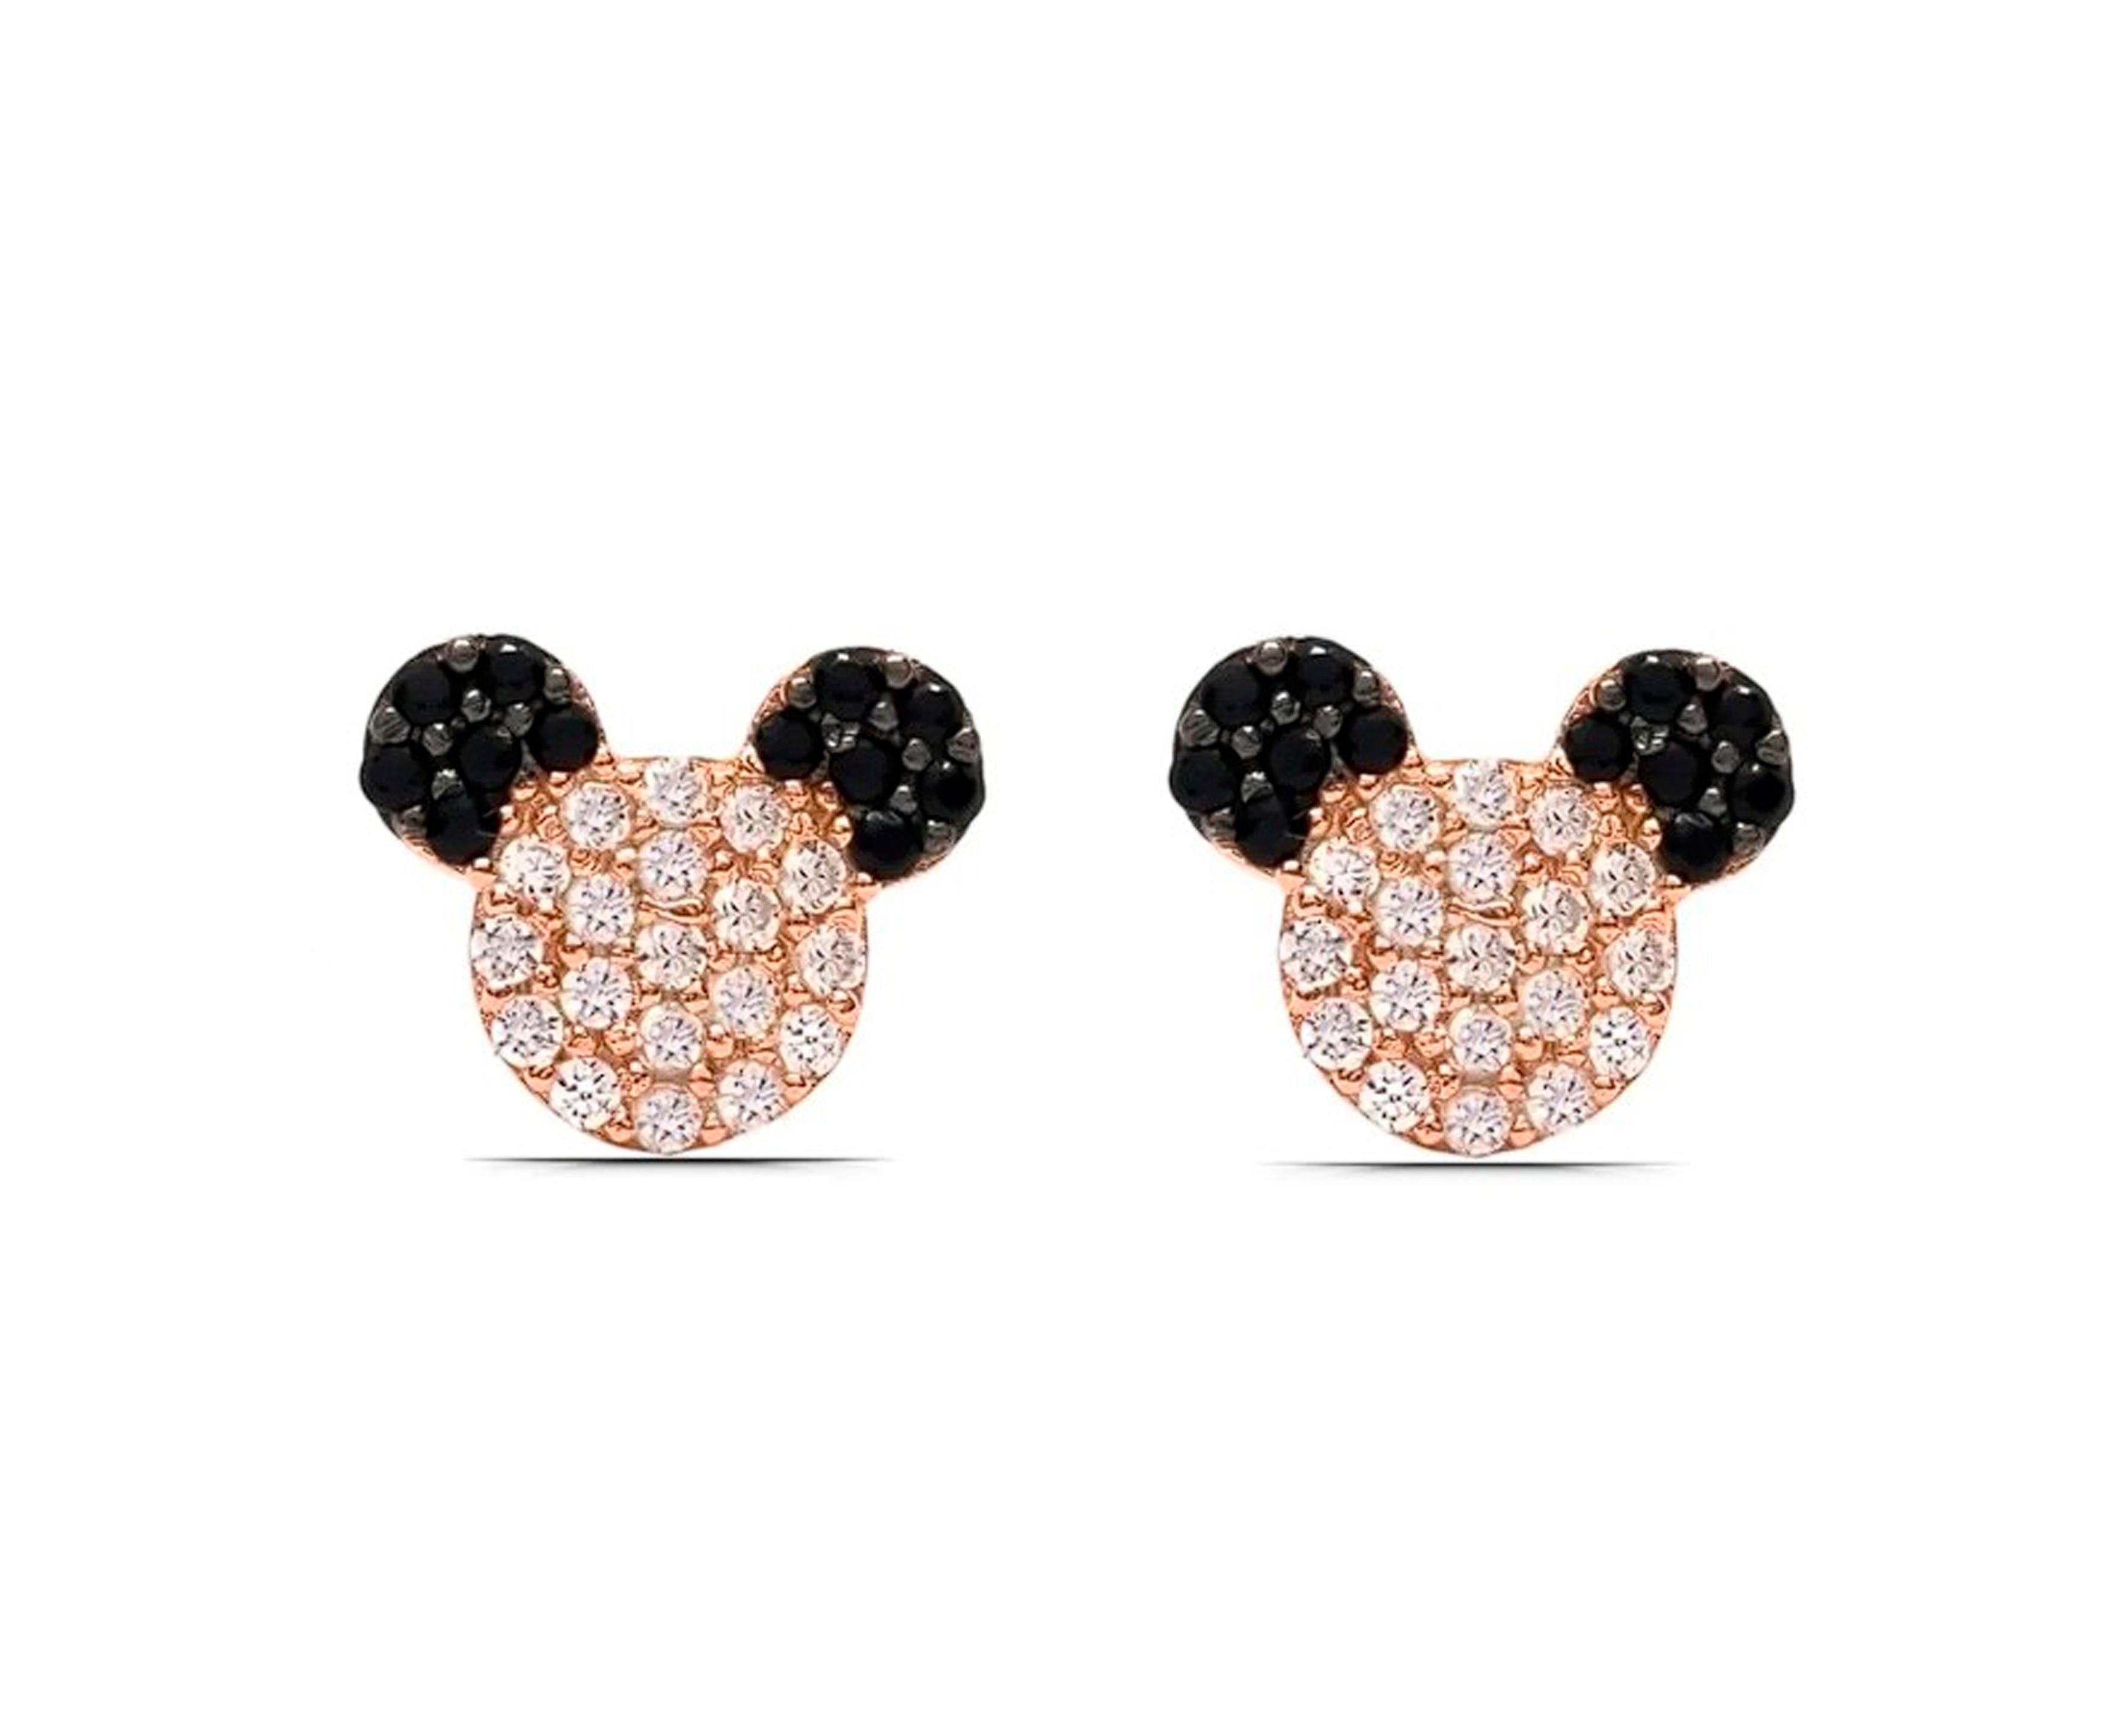 Minnie Mouse 14k gold Earrings Studs with gemstones. 
Yang girl earrinds.

Metal: 14k gold
Weight: 1.3 g.
Size: 9x8 mm.

Colored gemstones:  white and black round cut zirkones
Earrings goes with gold claps.

auction